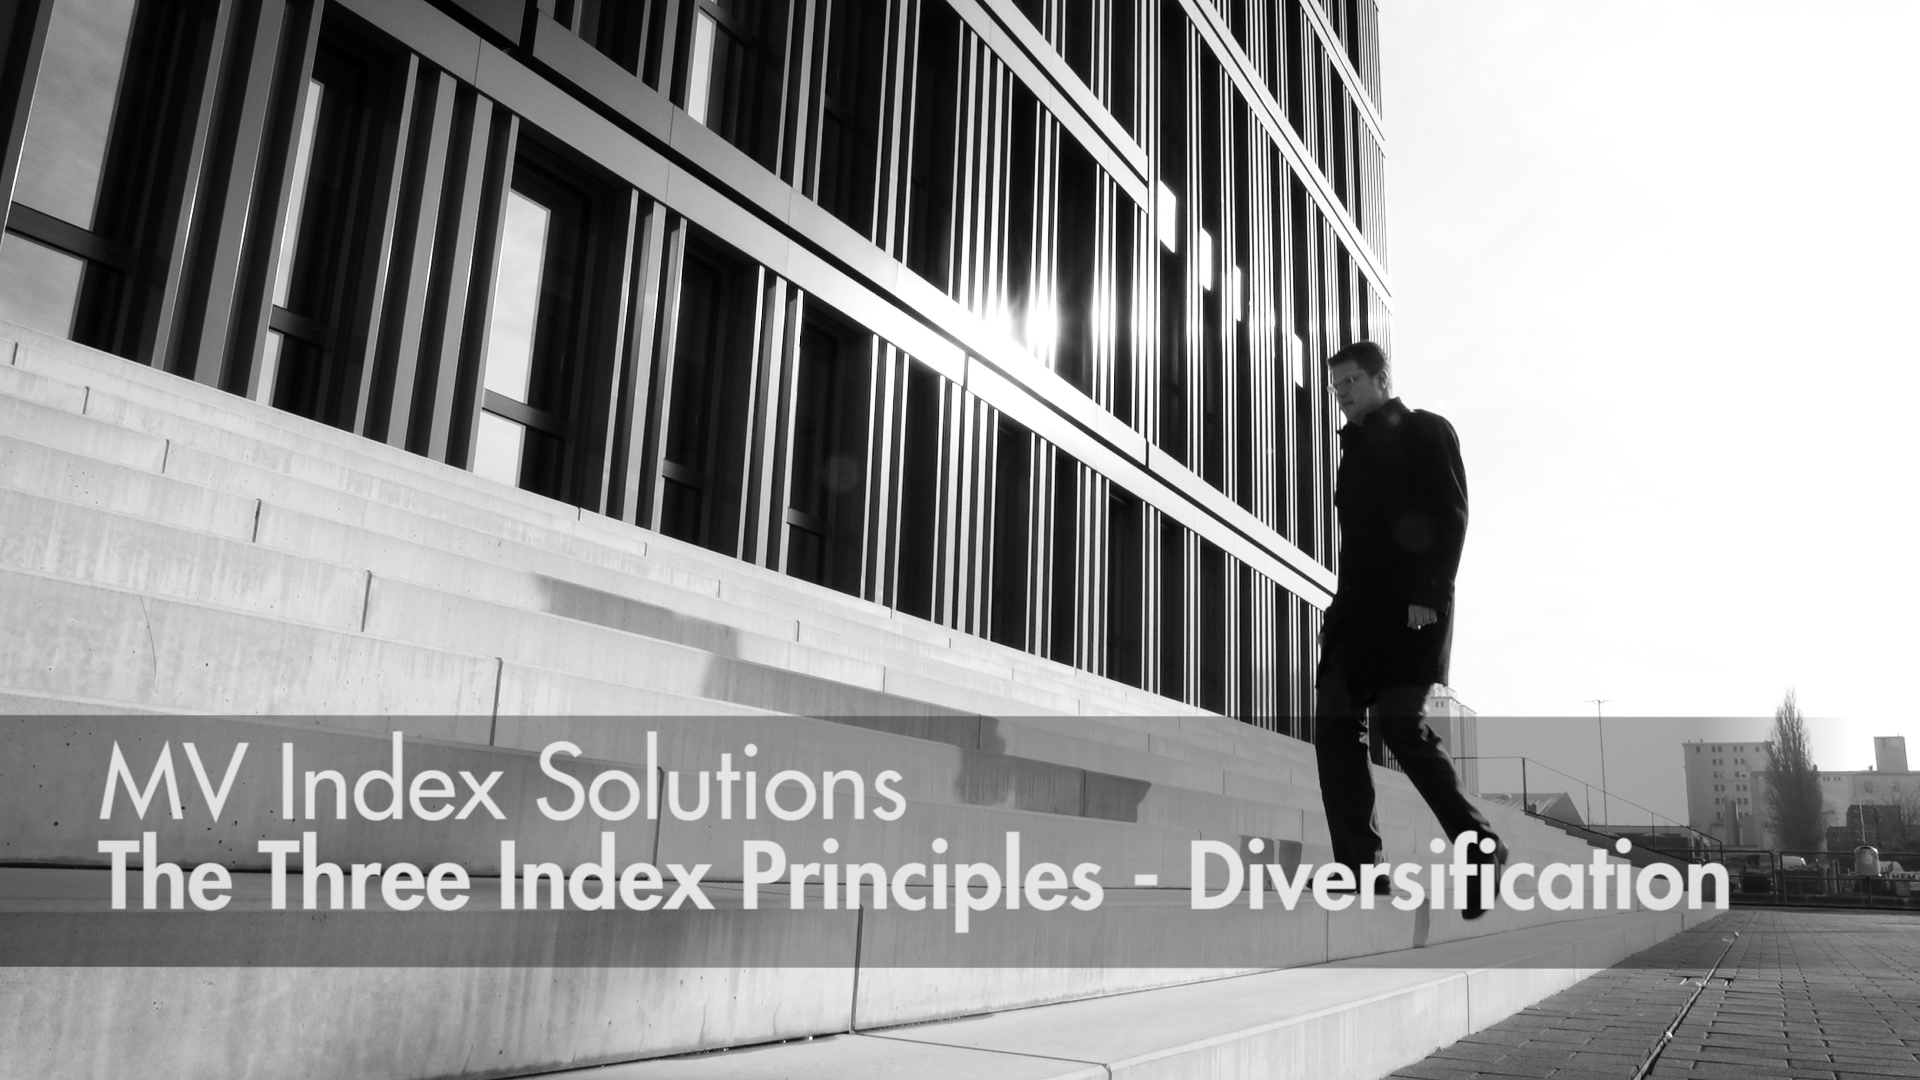 Video: Diversification in MVIS Indices